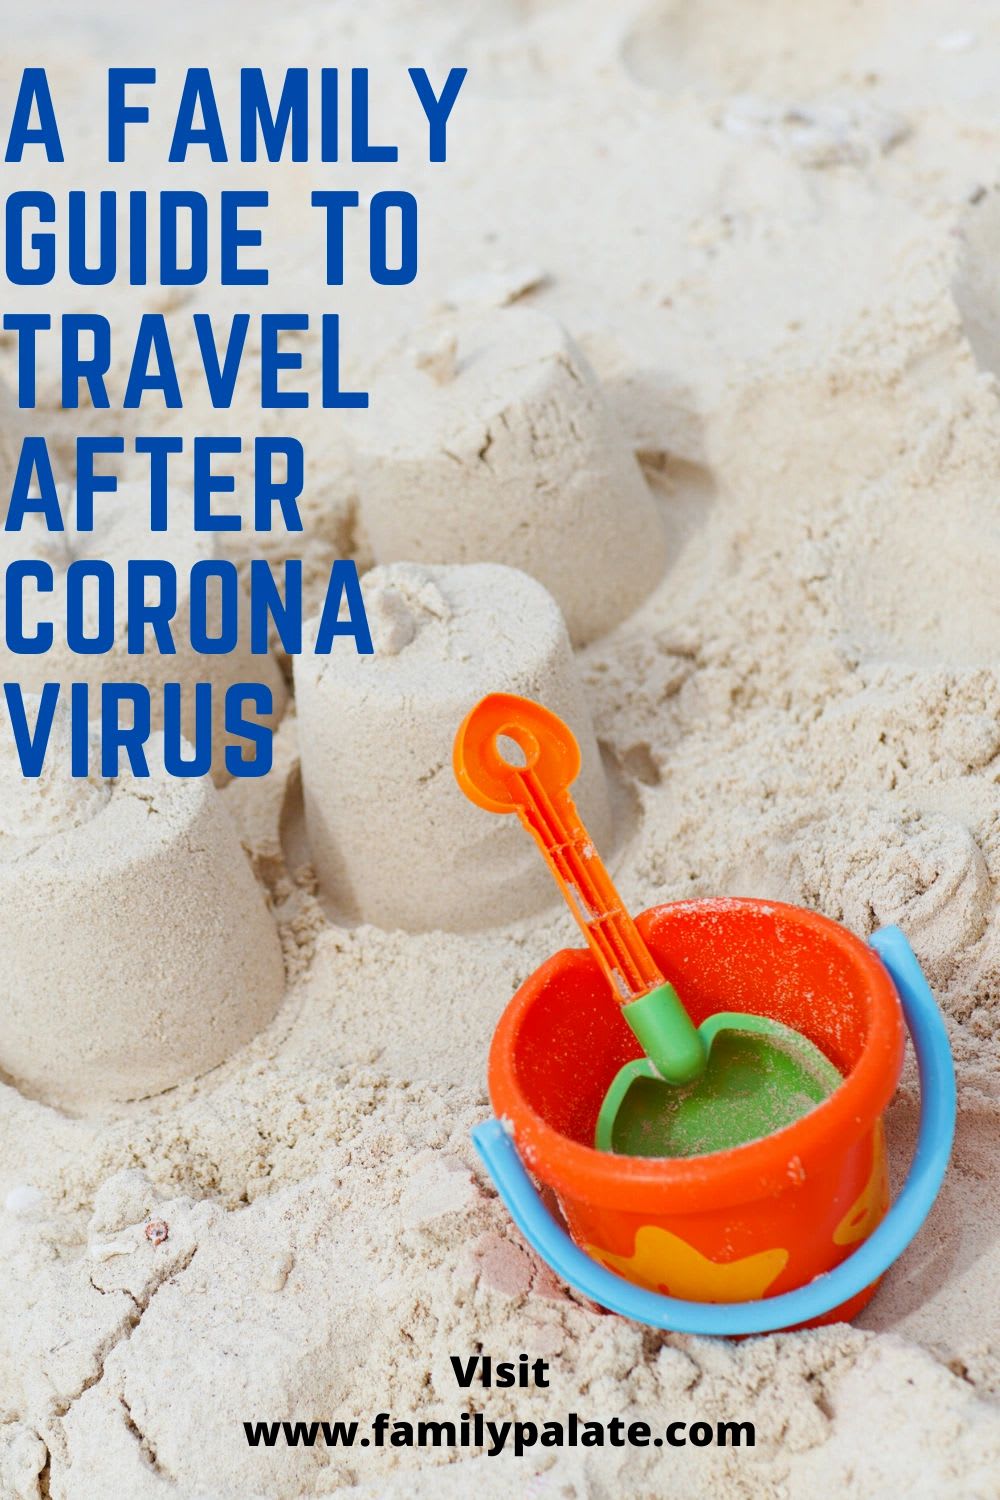 A Family Guide To Travel After Corona Virus